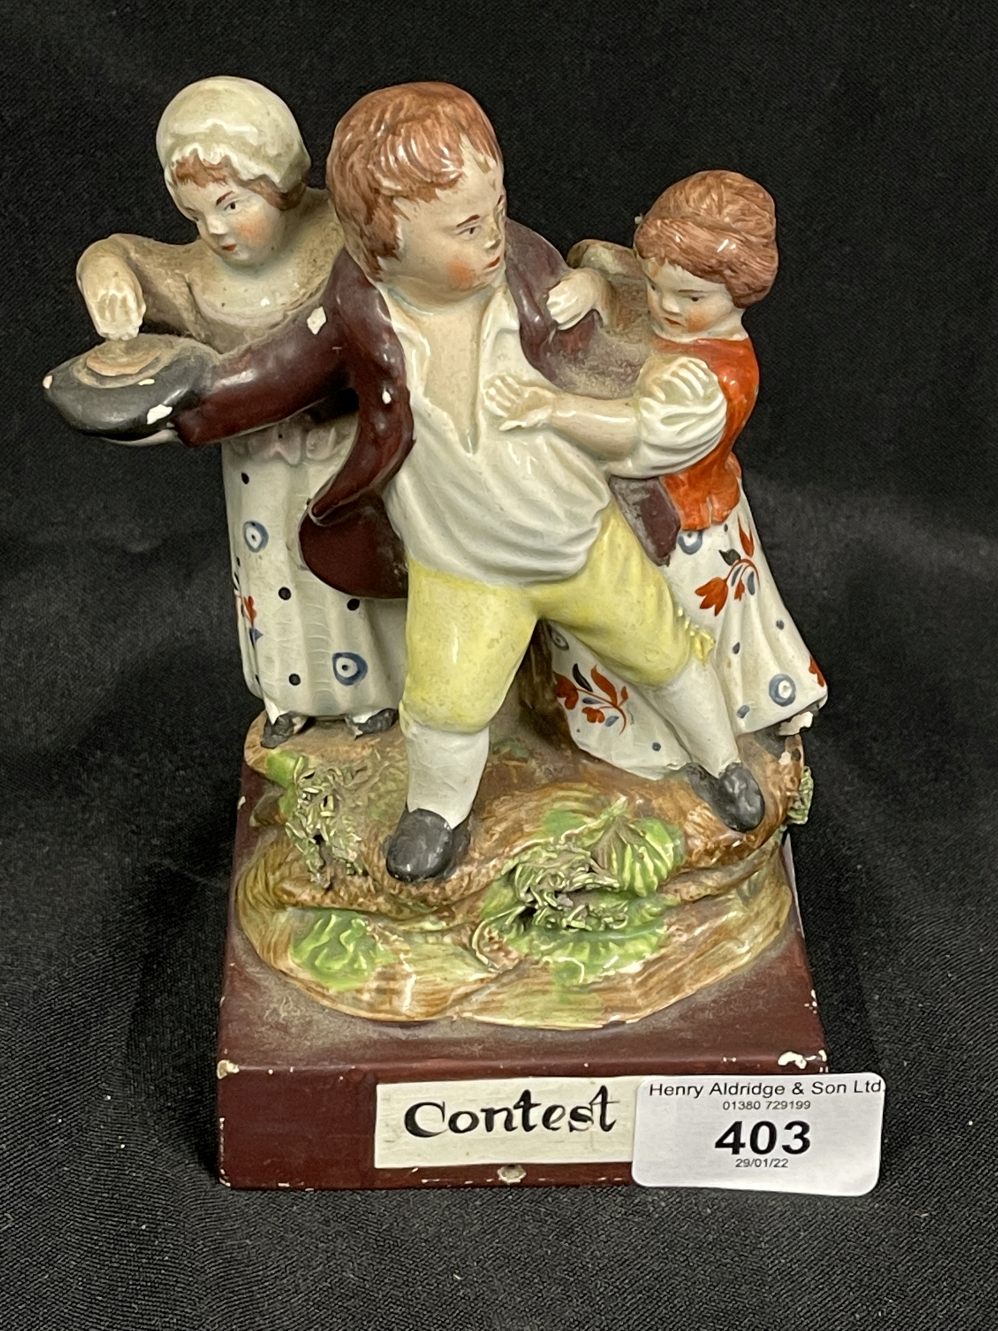 Early 19th cent. English pearlware group 'The Contest' on brown base, possibly Dudson. 6¾ins. x 3¾